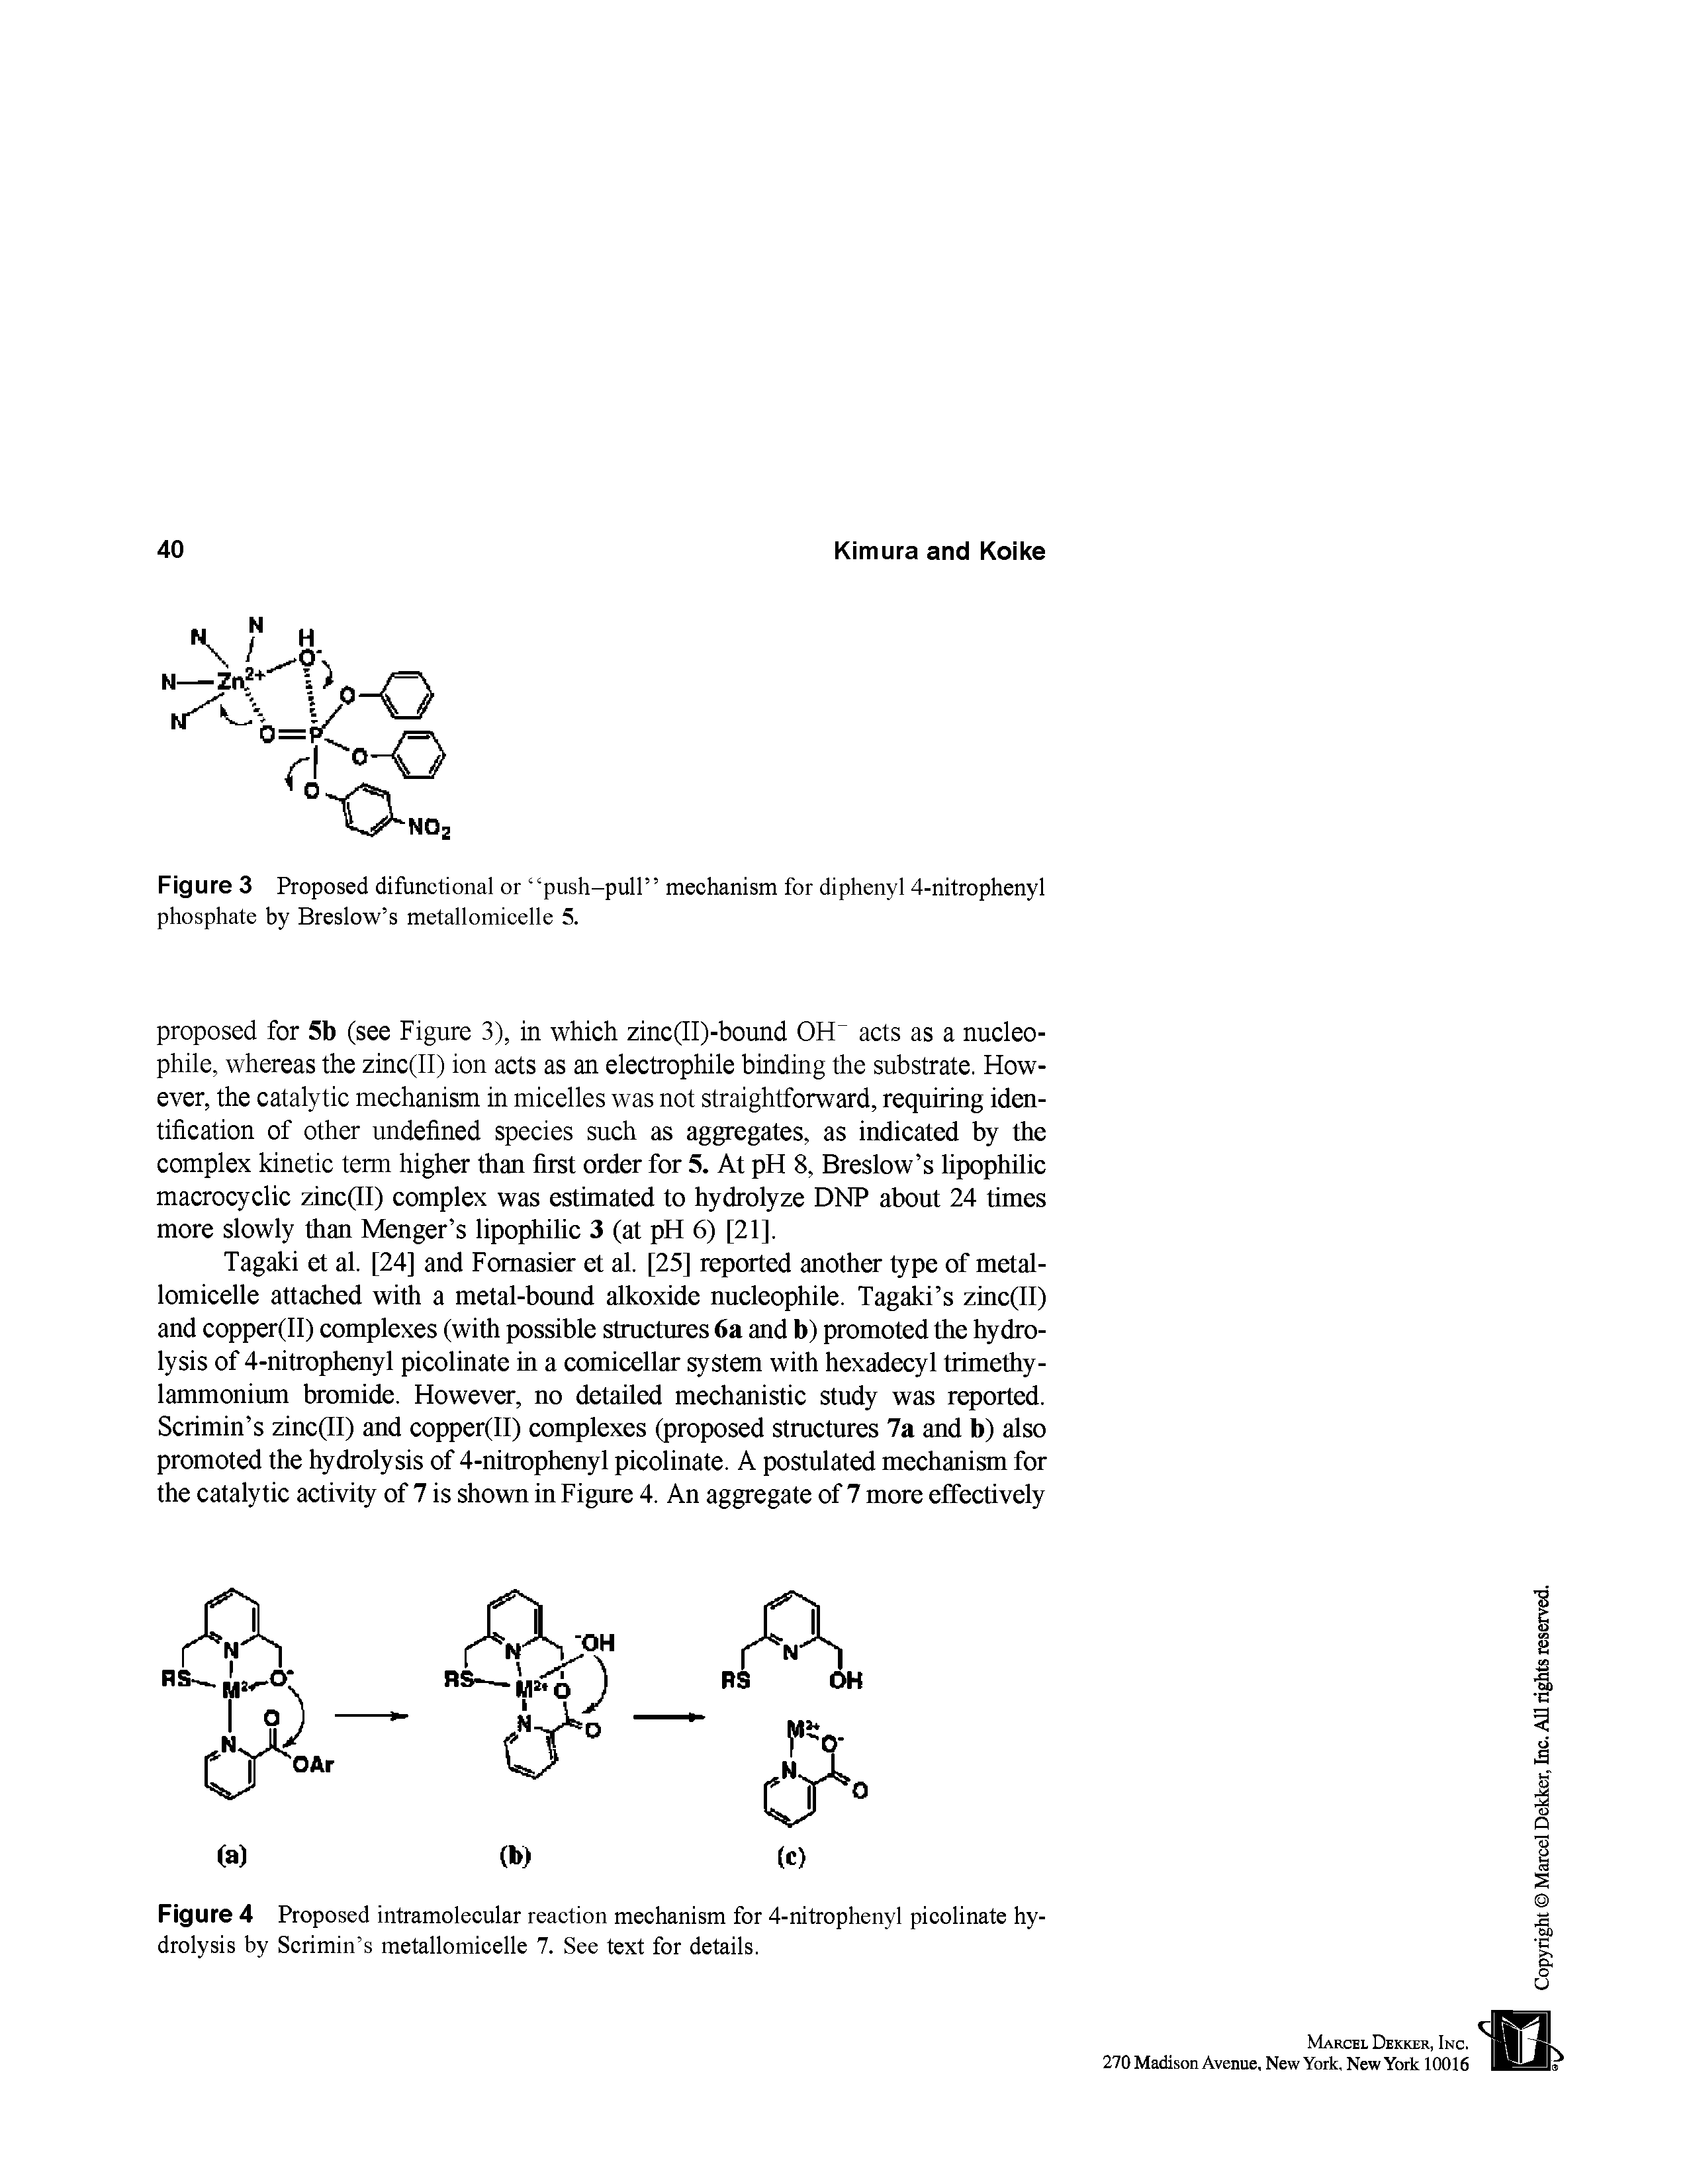 Figure 4 Proposed intramolecular reaction mechanism for 4-nitrophenyl picolinate hydrolysis by Scrimin s metallomicelle 7. See text for details.